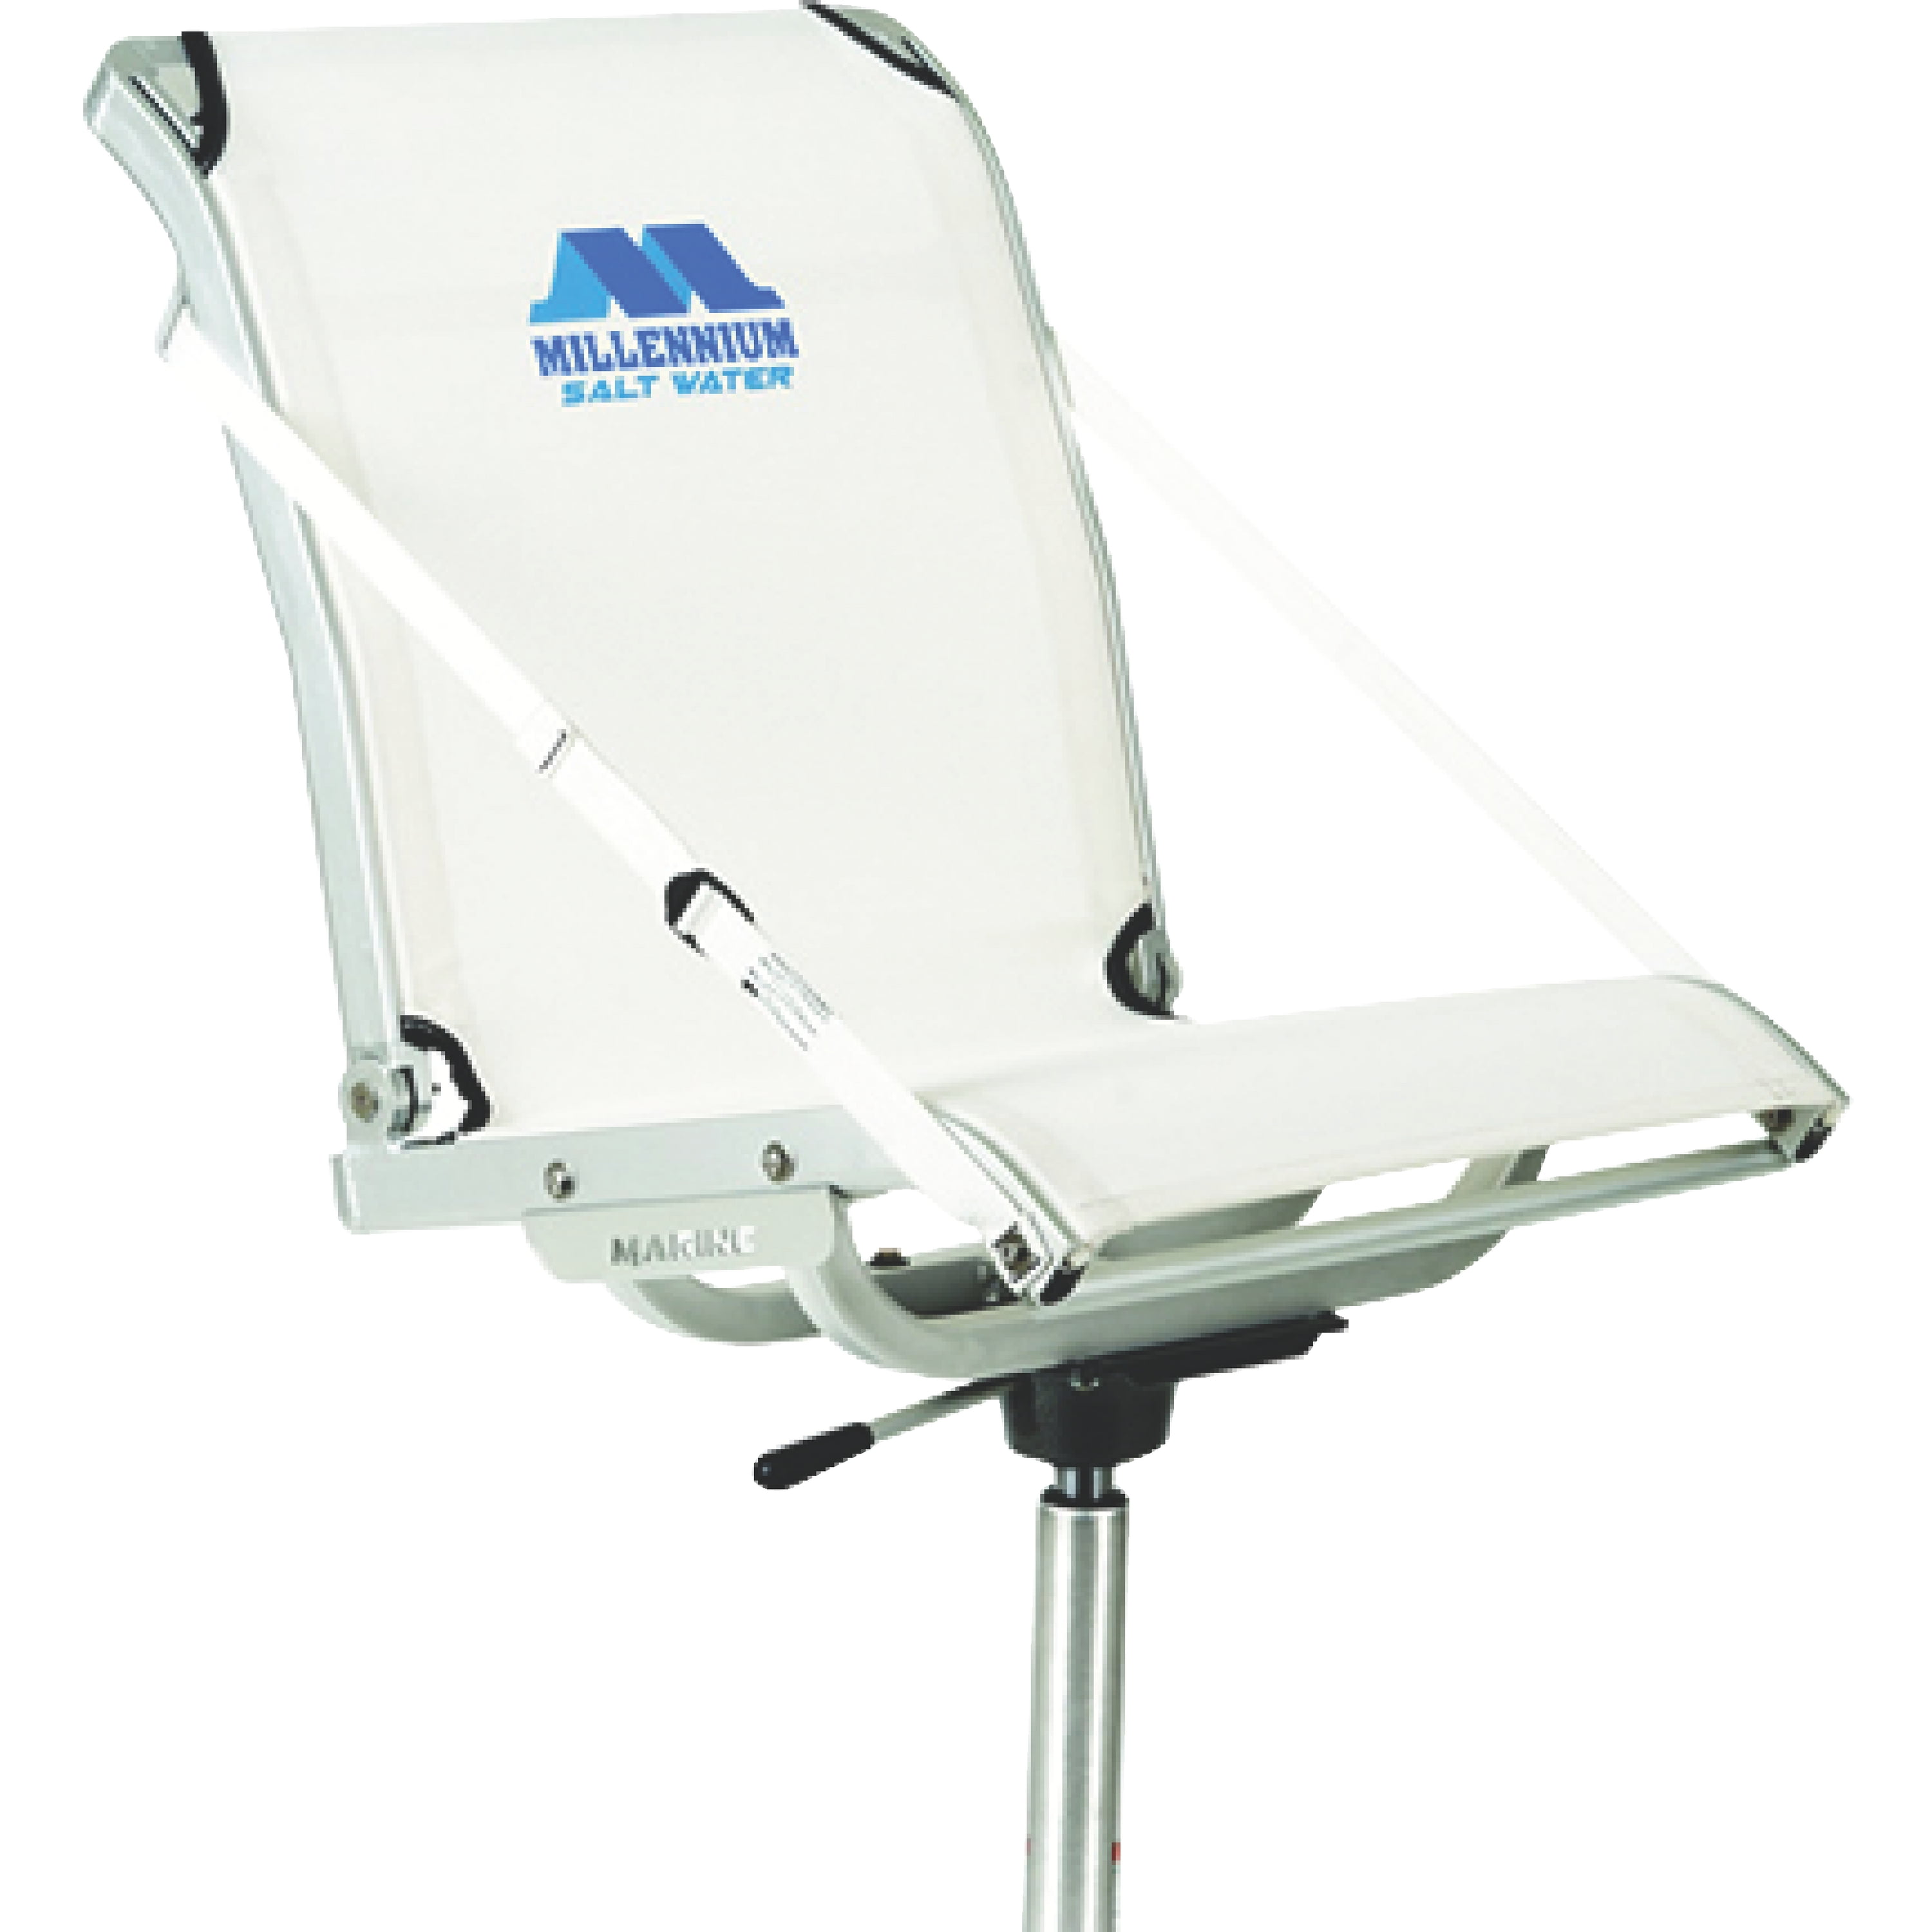 GREY SPECIAL MILLENNIUM B100gy BOAT SEAT WITH MATCHING B200GN CASTING SEAT 